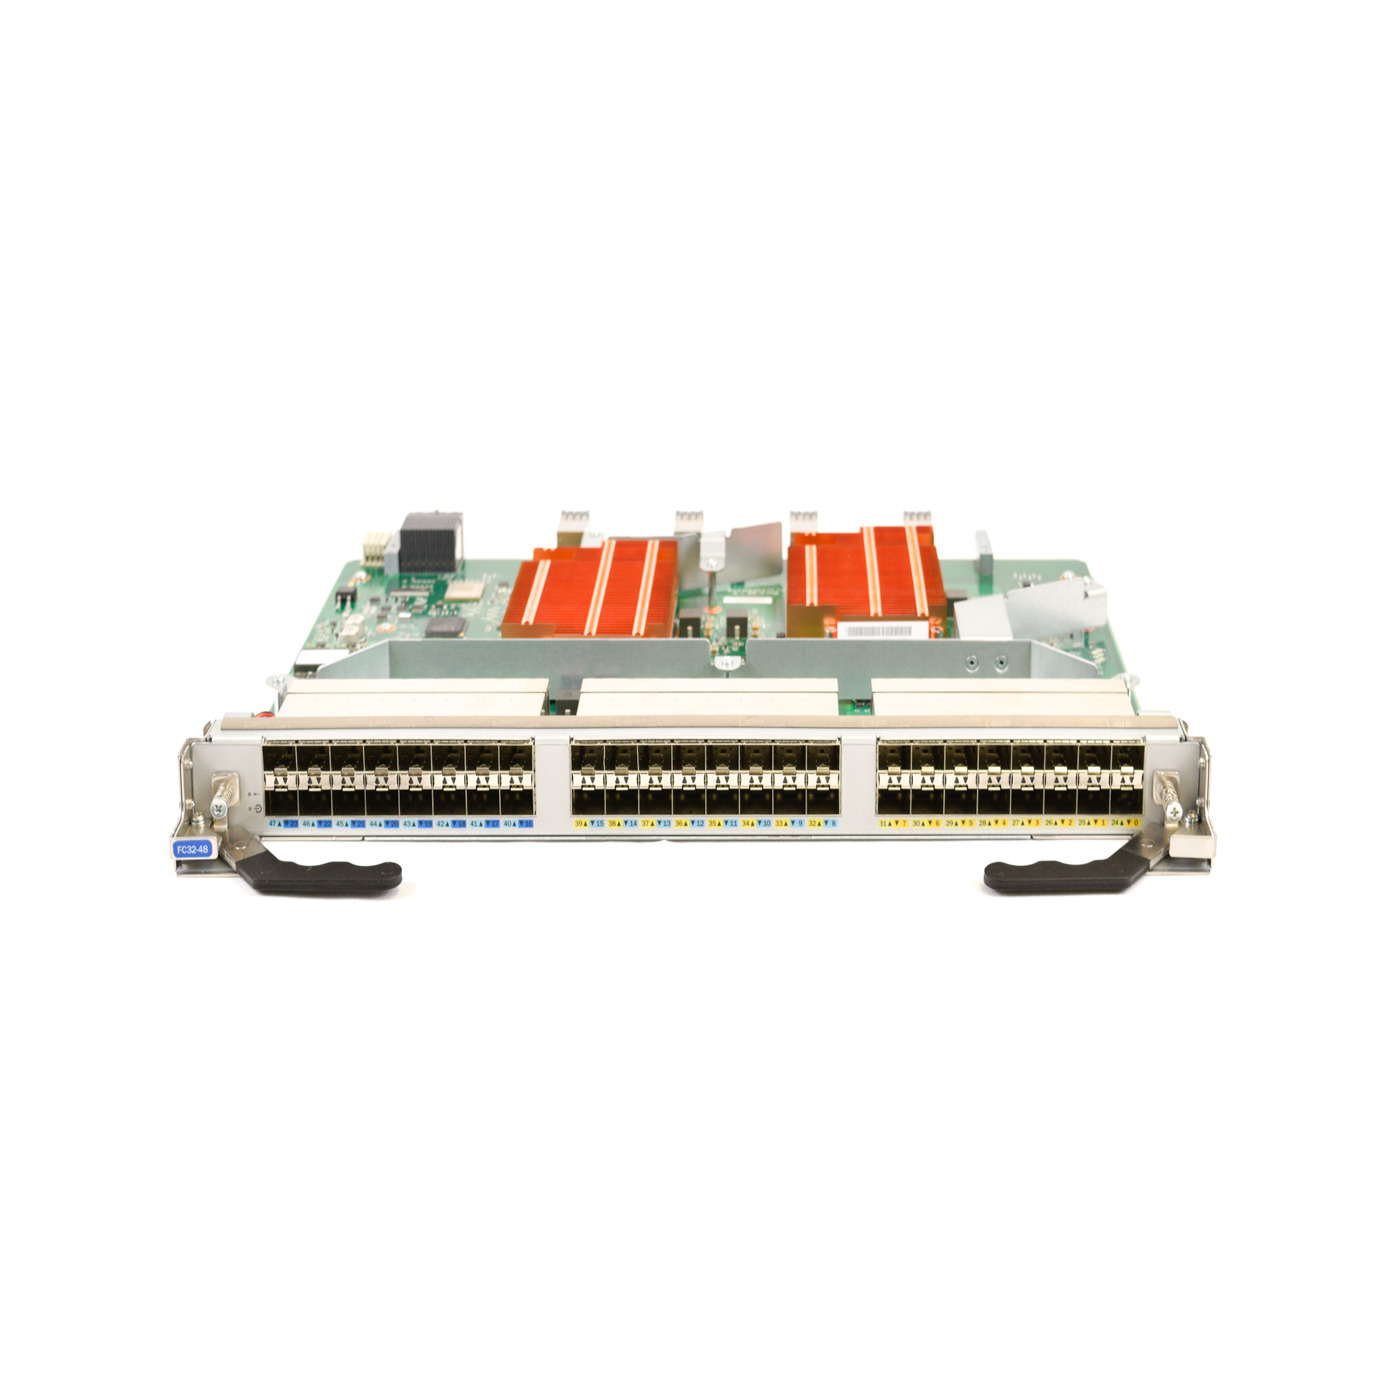 Brocade FC32-48 Fibre Channel port blade with 48 32 - Gbps SFP+ ports